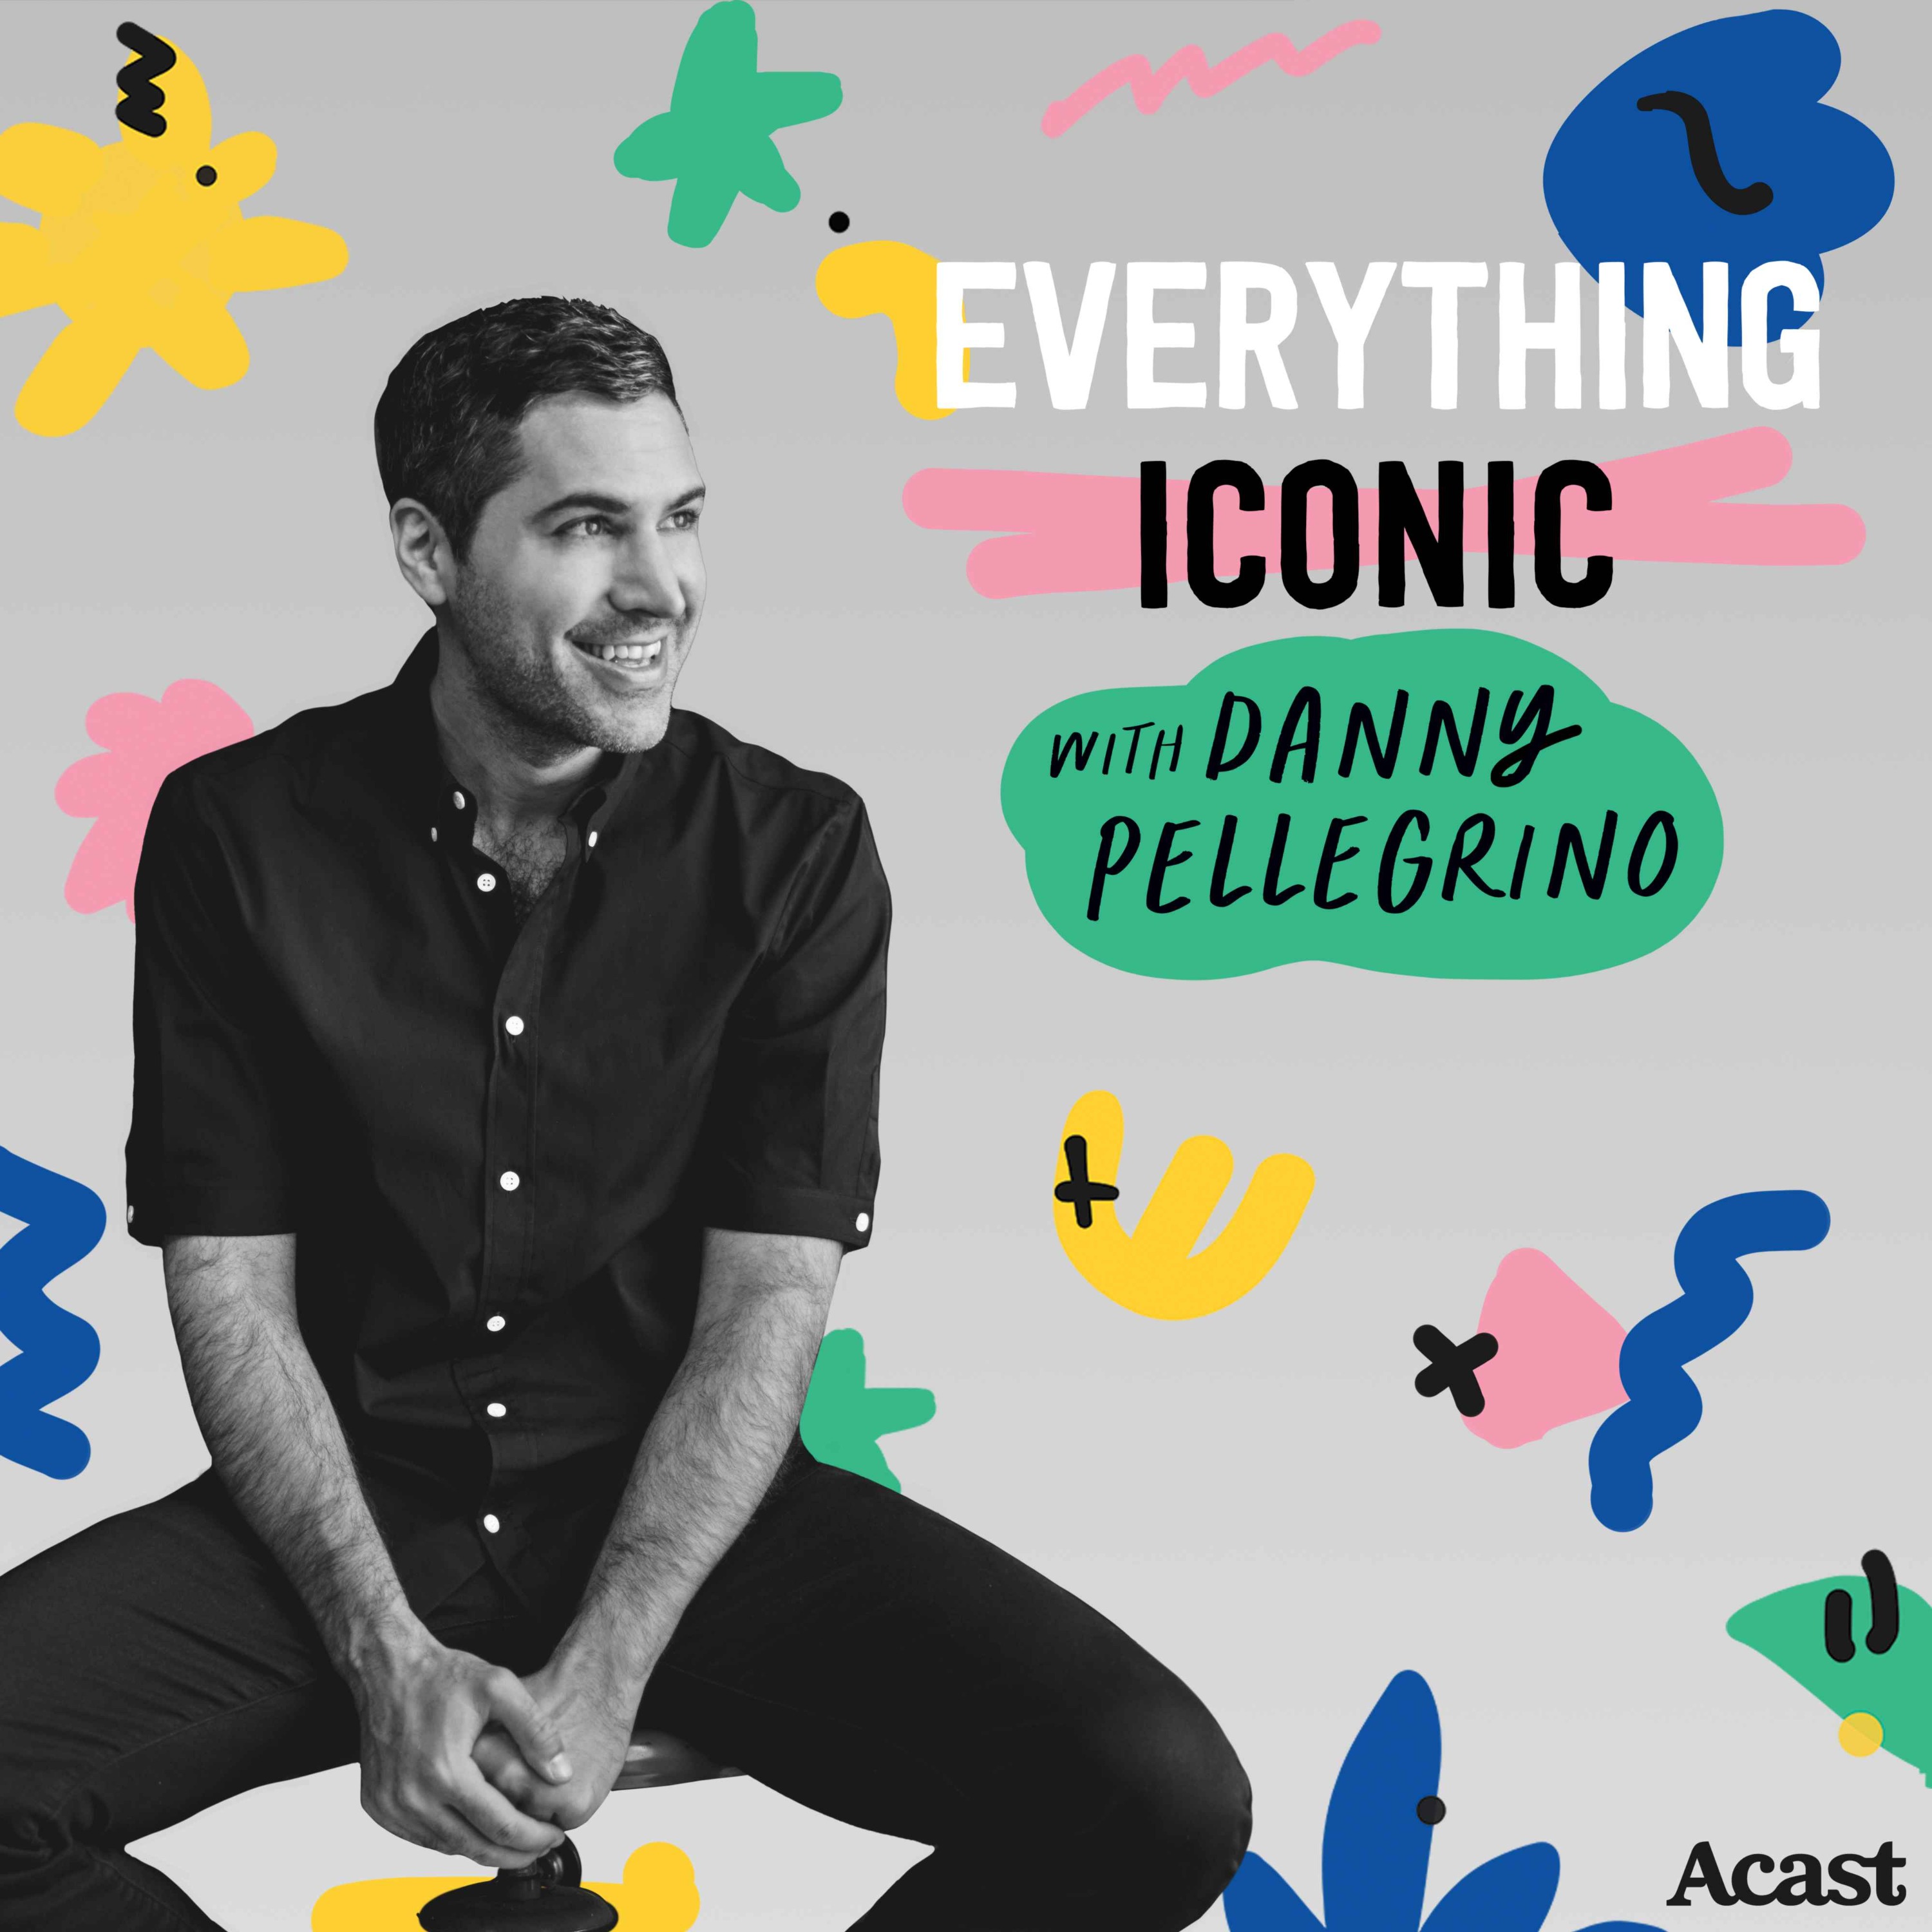 Everything Iconic with Danny Pellegrino by Danny Pellegrino